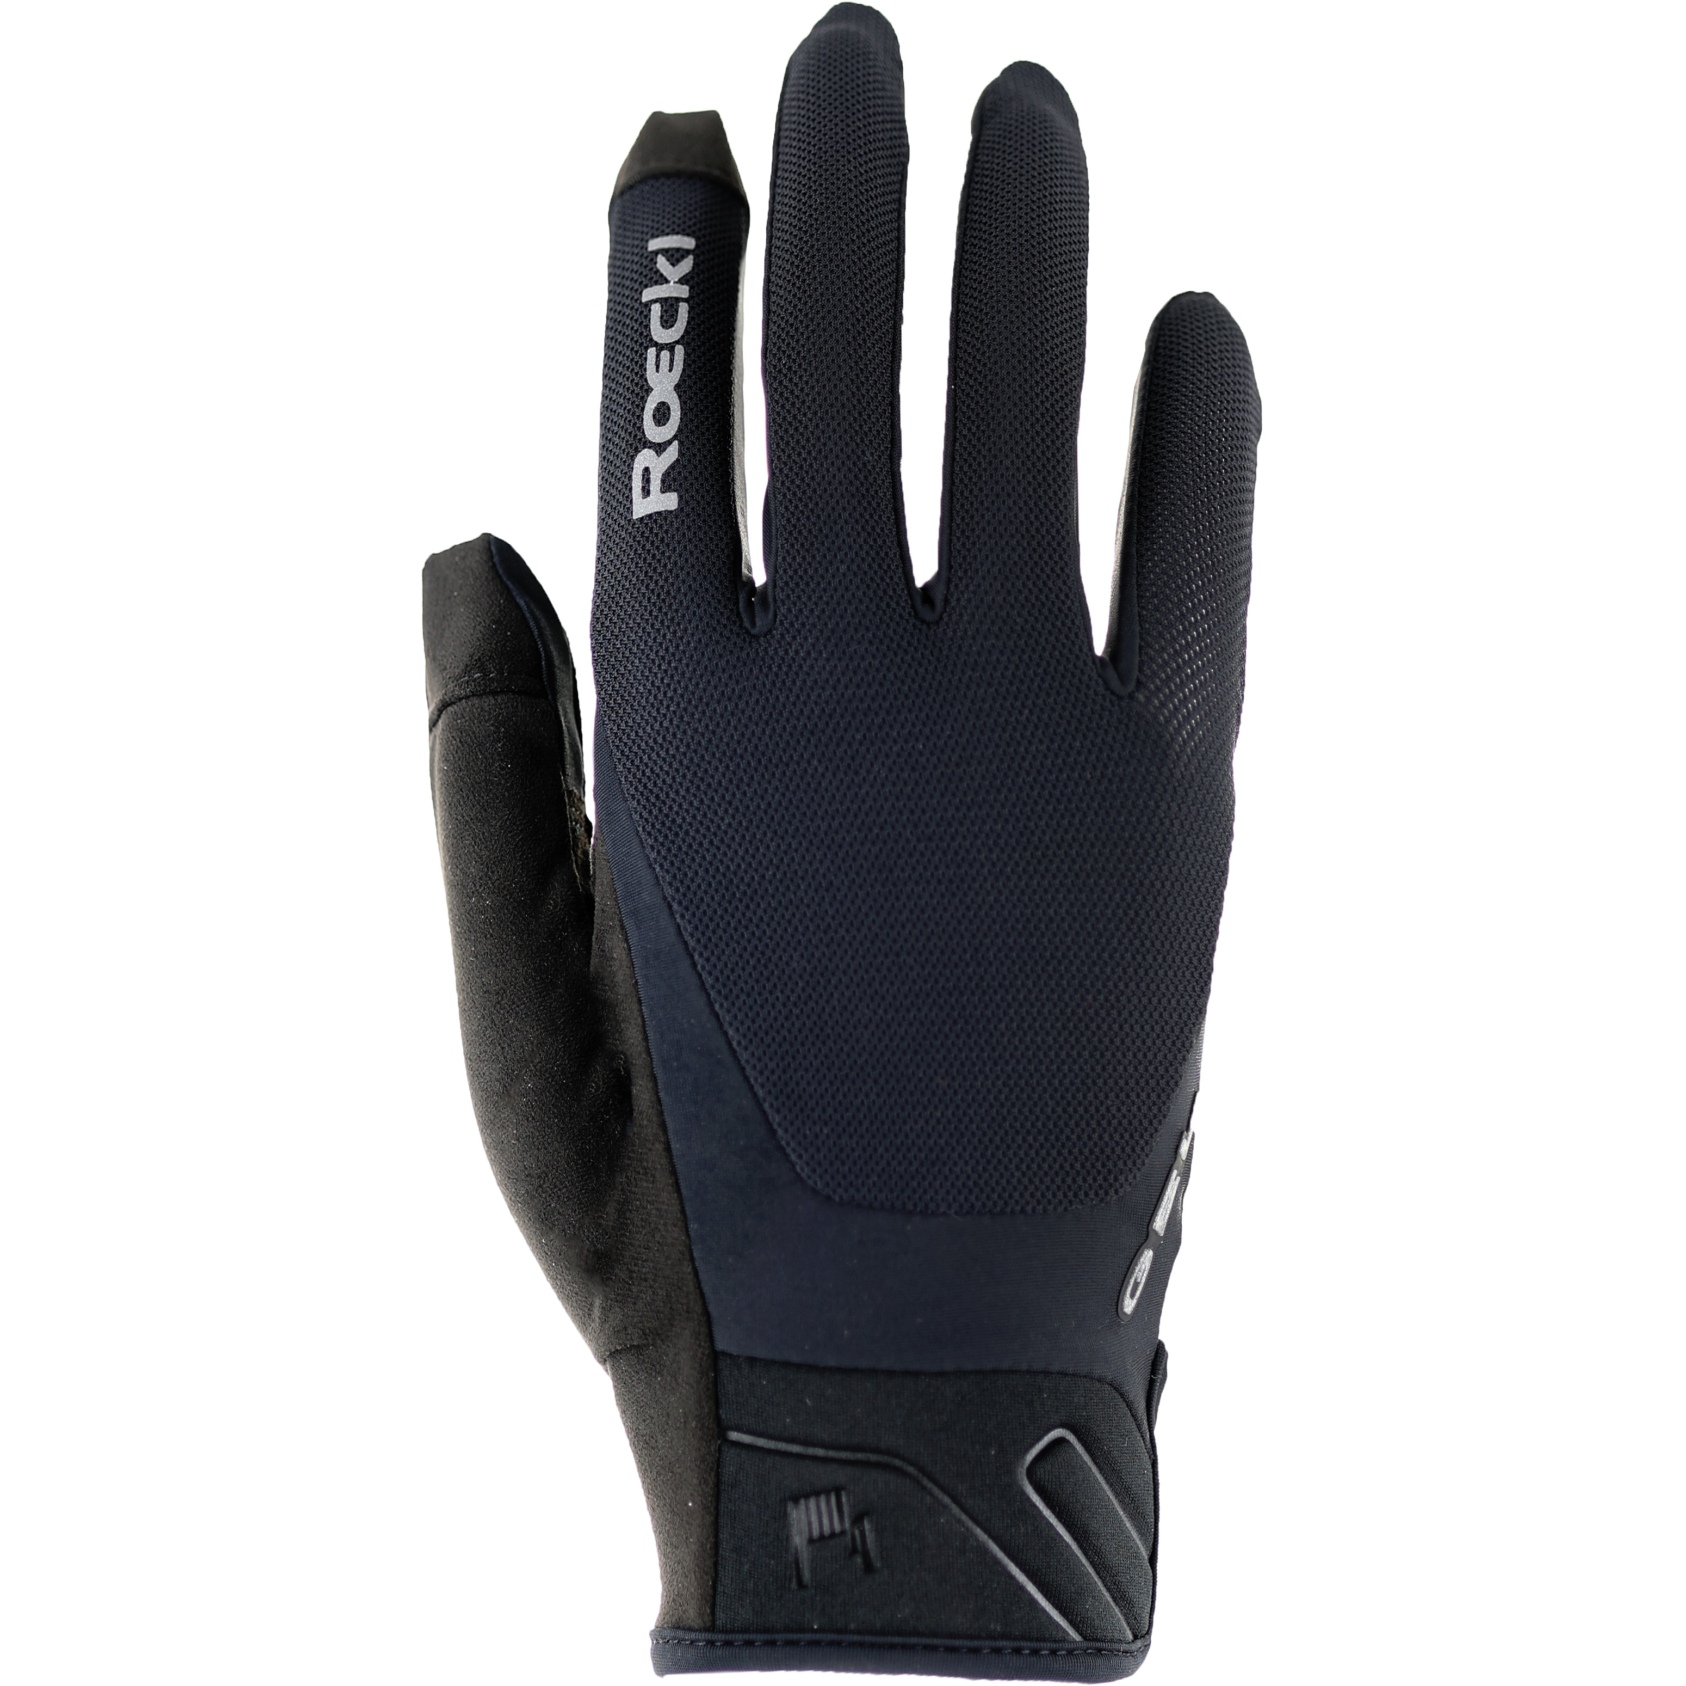 Picture of Roeckl Sports Mori 2 Cycling Gloves - black 9000